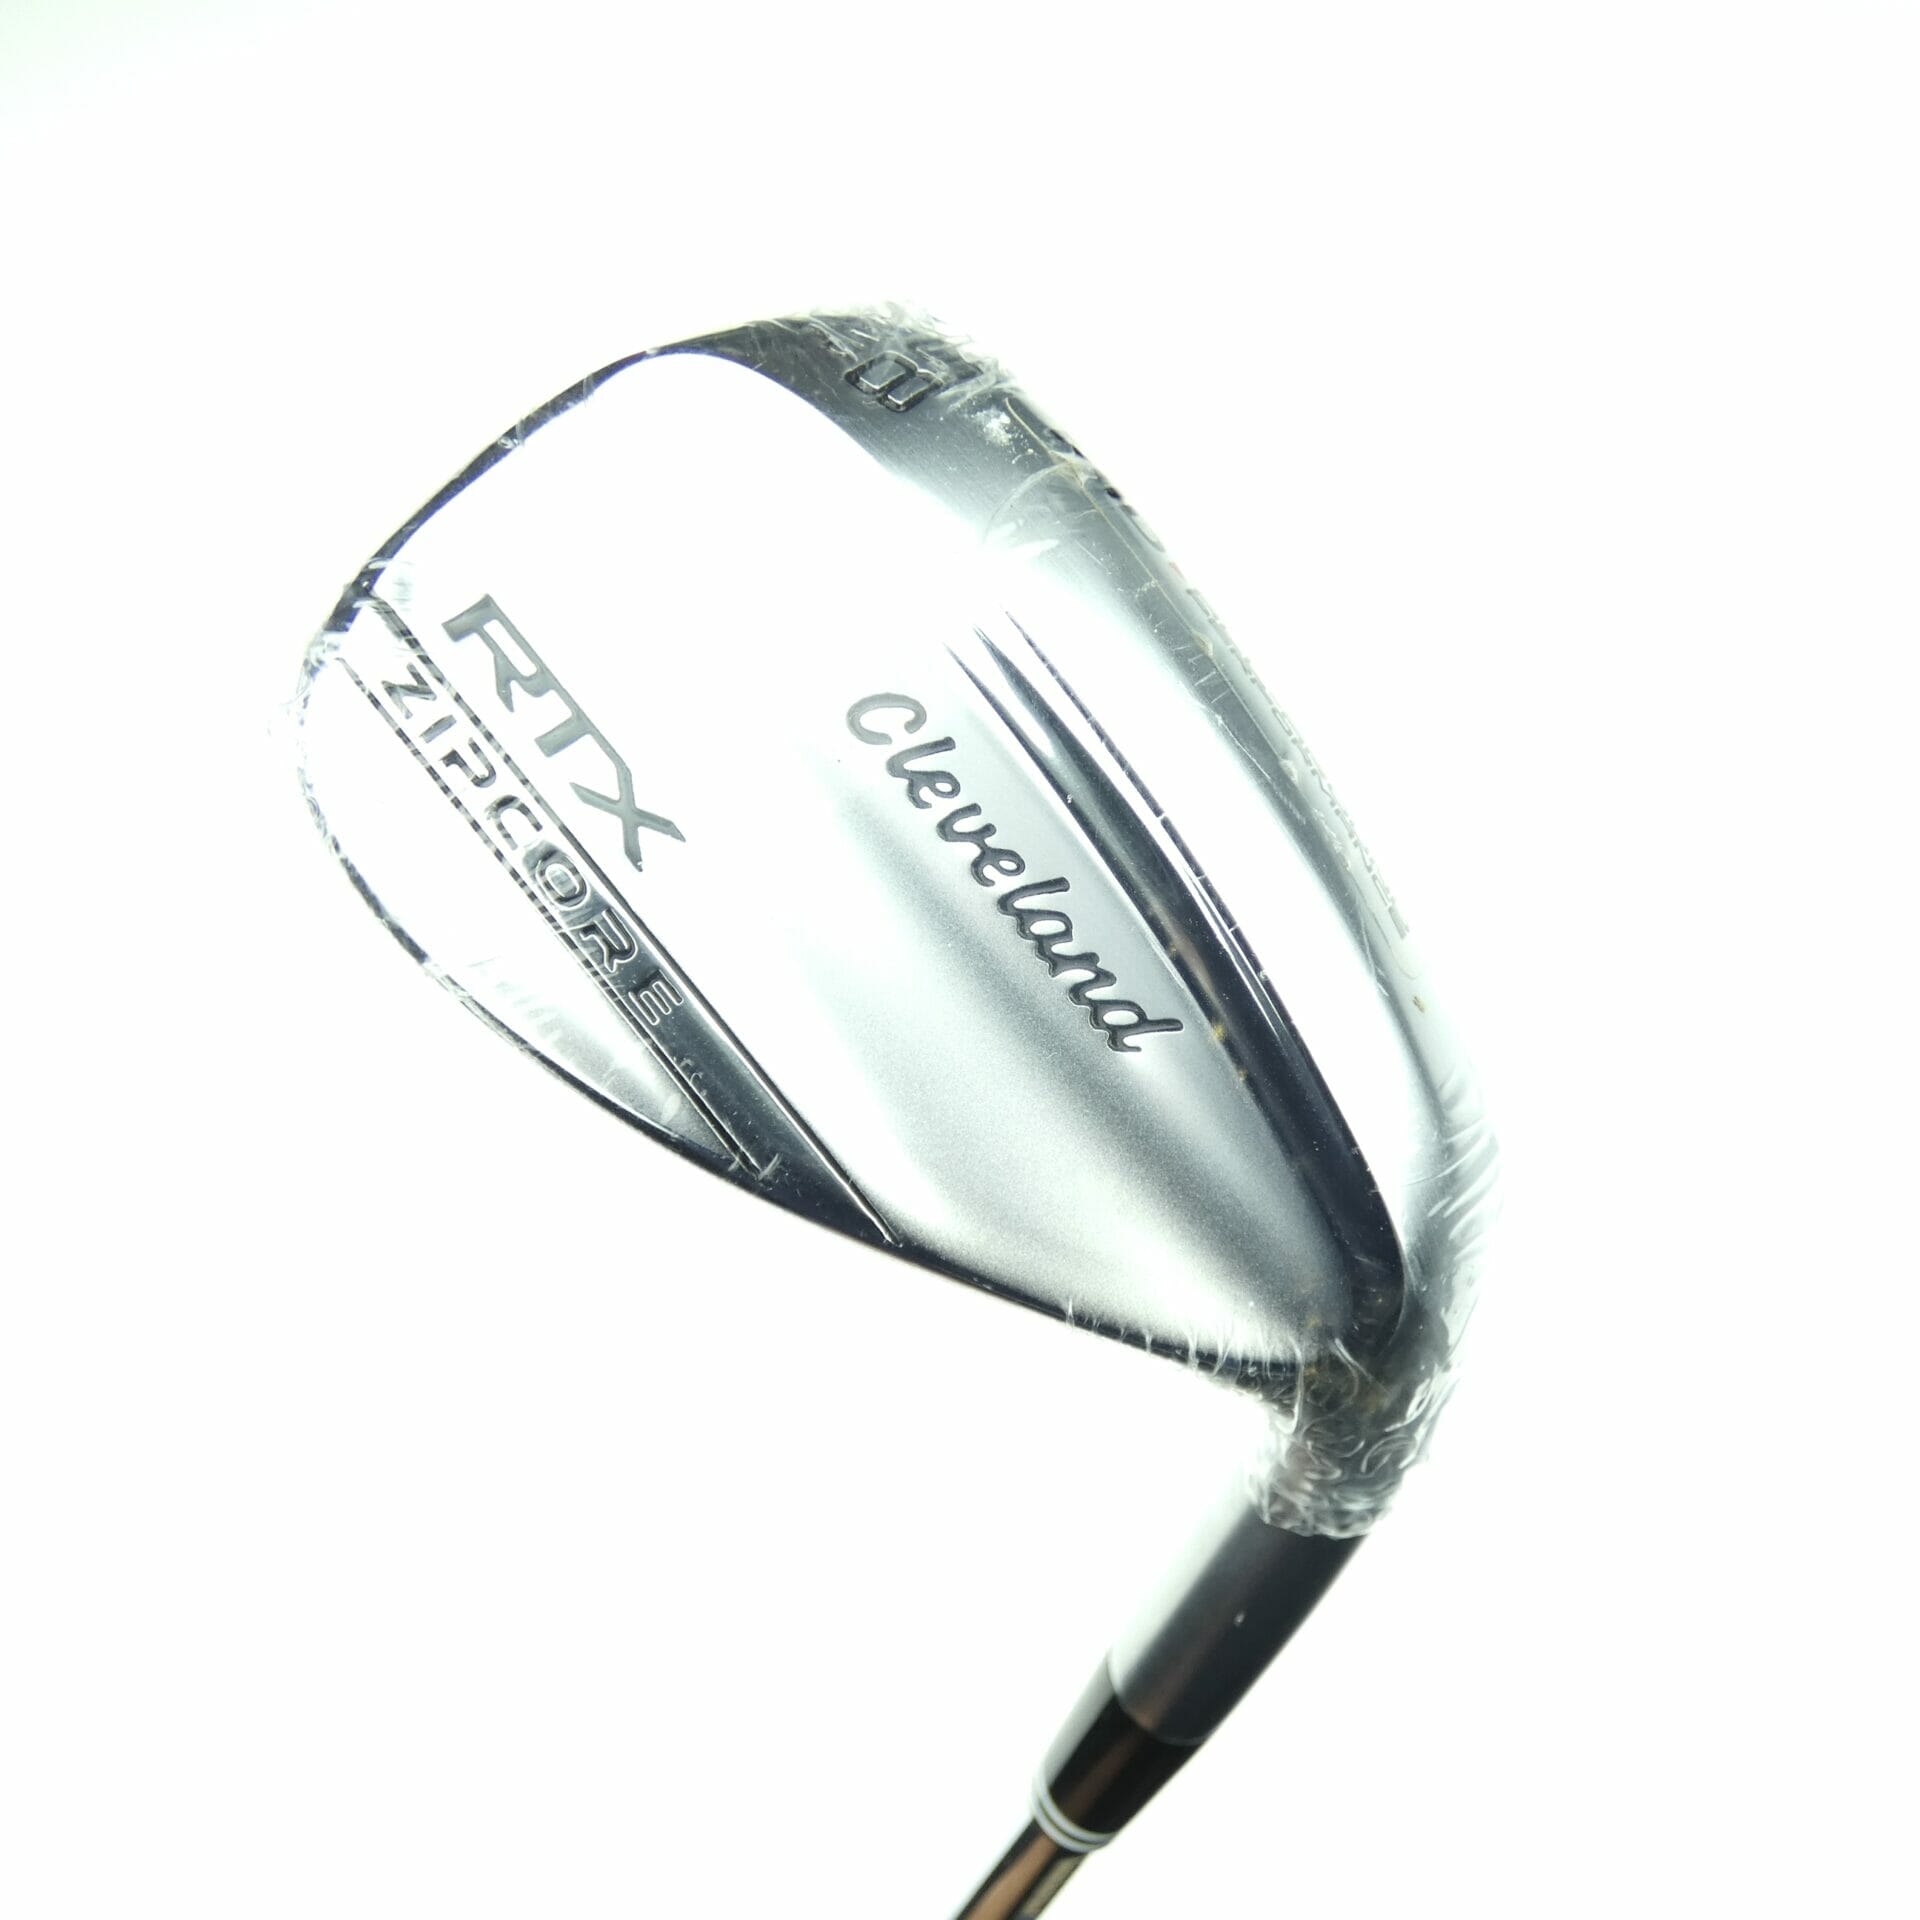 New Cleveland RTX Zipcore Lob Wedge 58 Degree Dynamic Gold Spinner  Wedge Flex Nearly New Golf Clubs